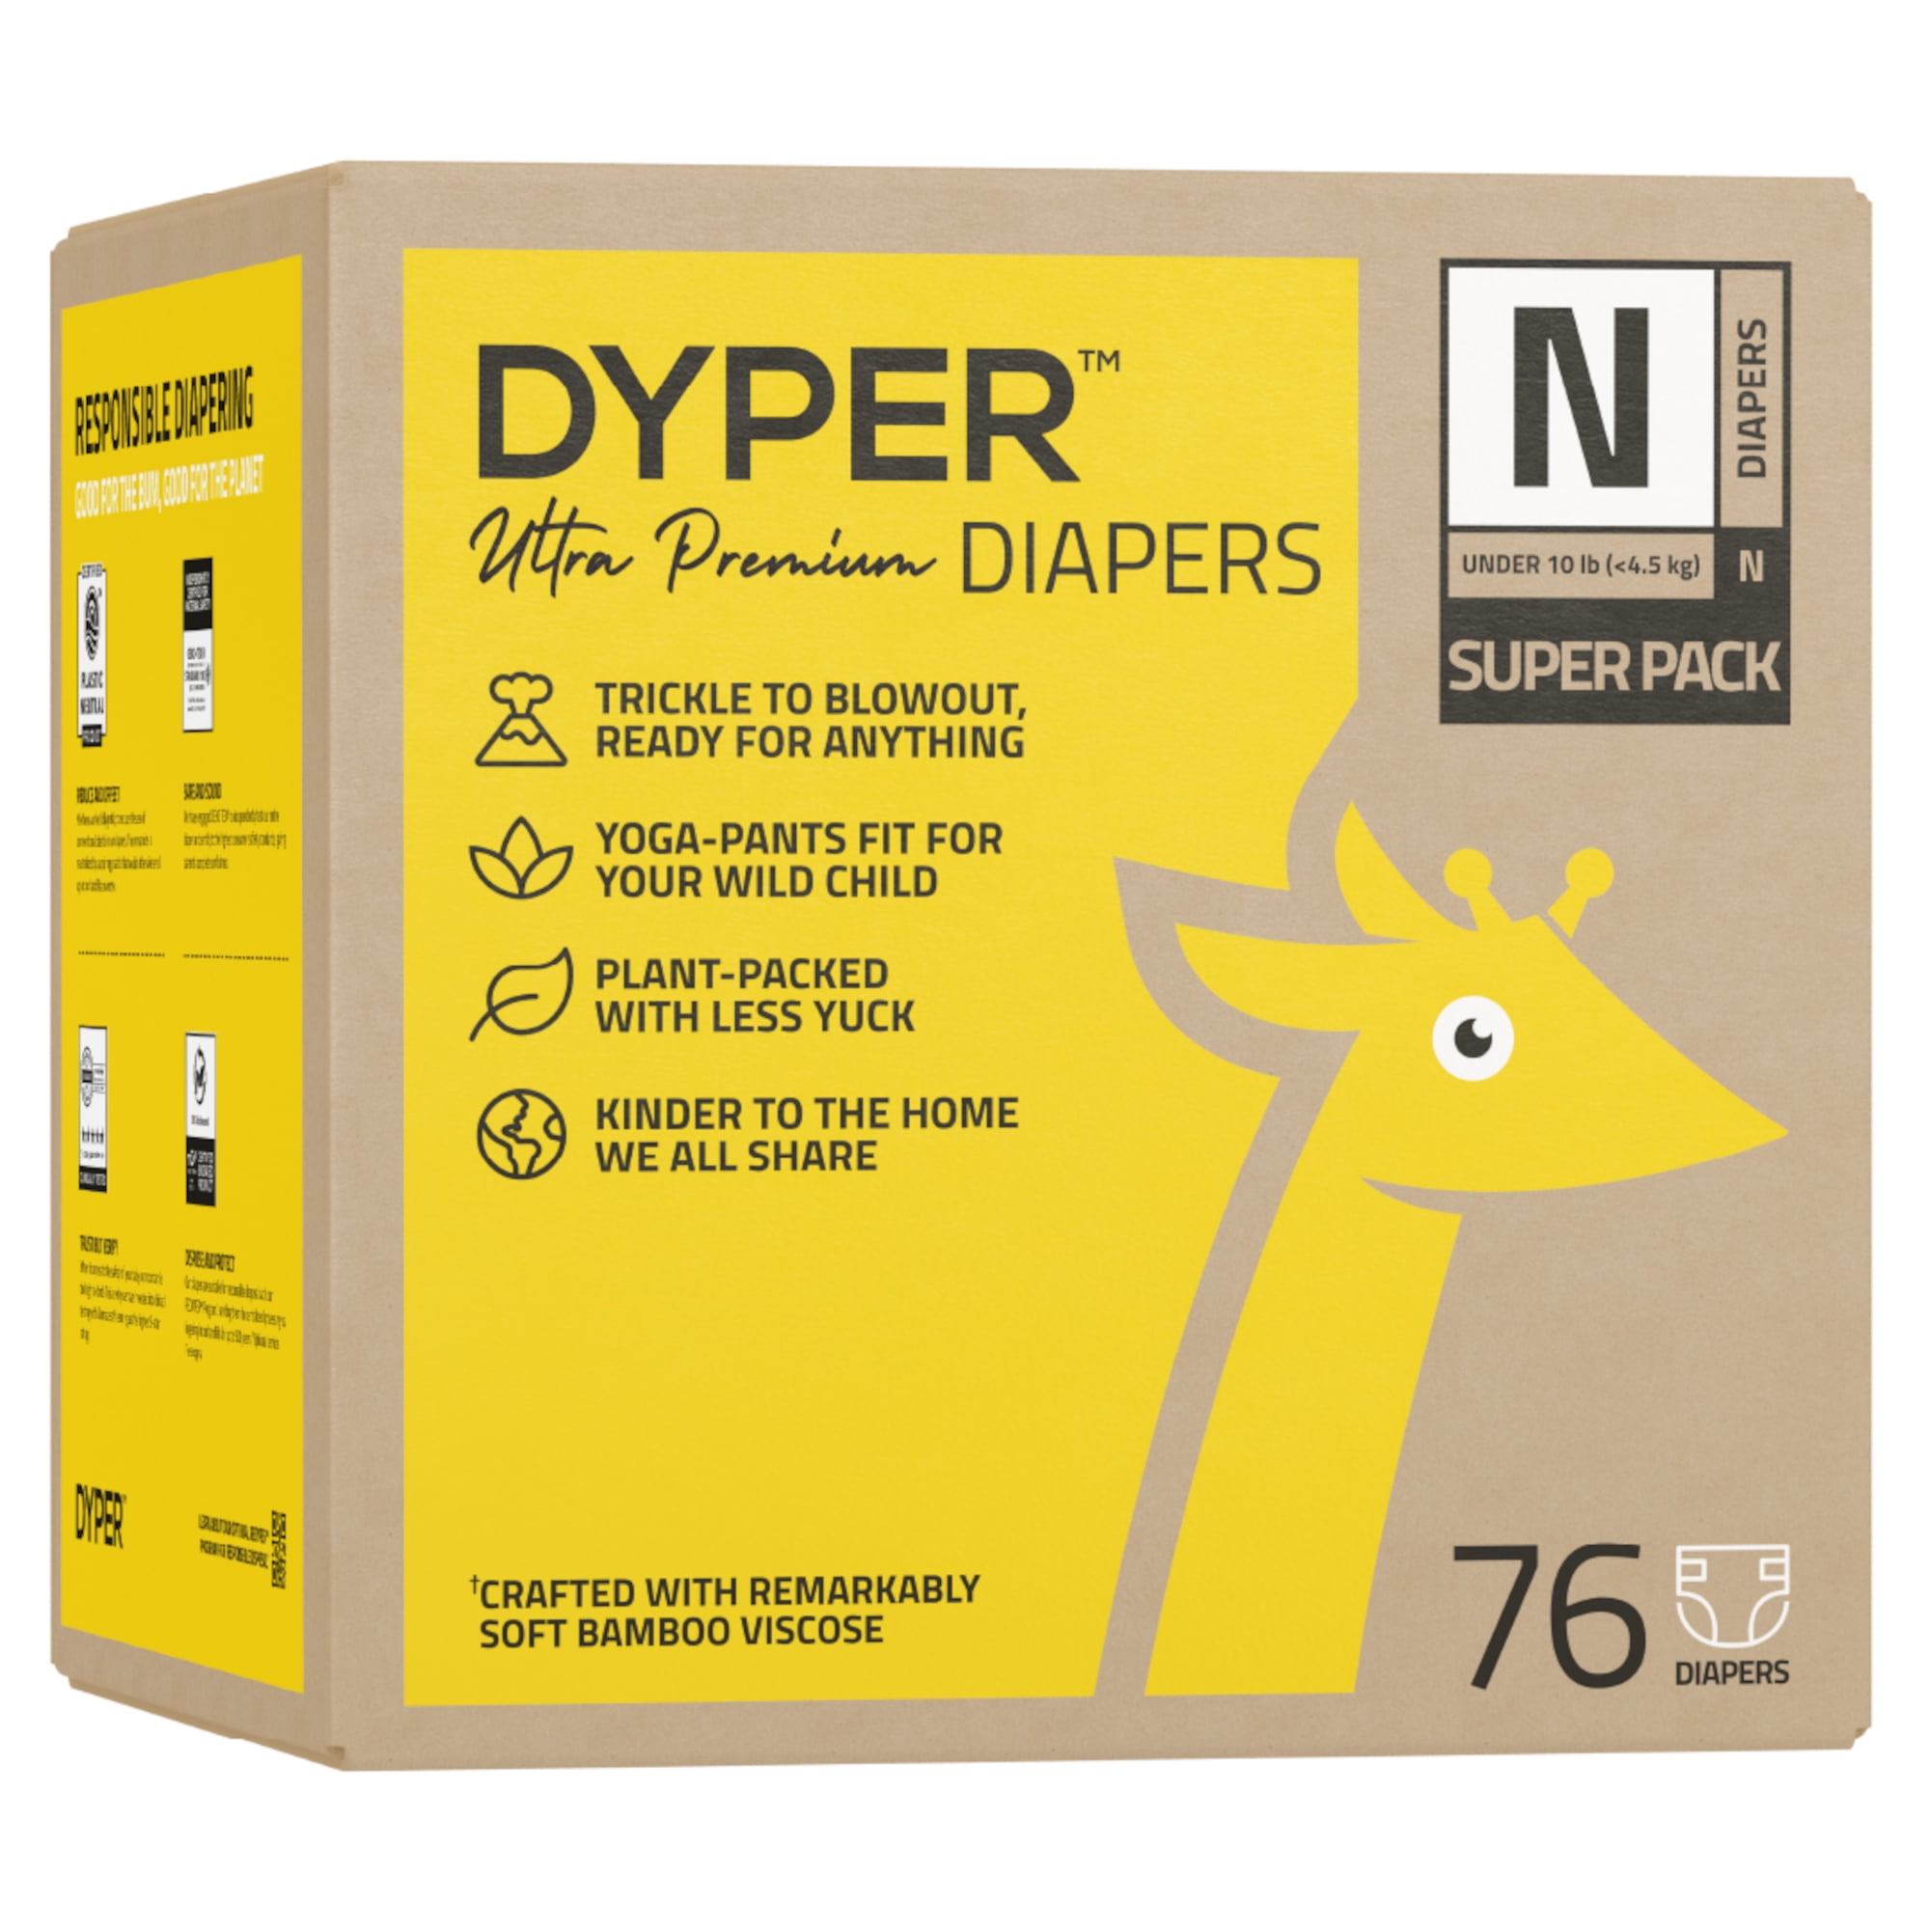 DYPER Ultra Premium Diapers, Remarkably Soft, Size Newborn, 76 Count